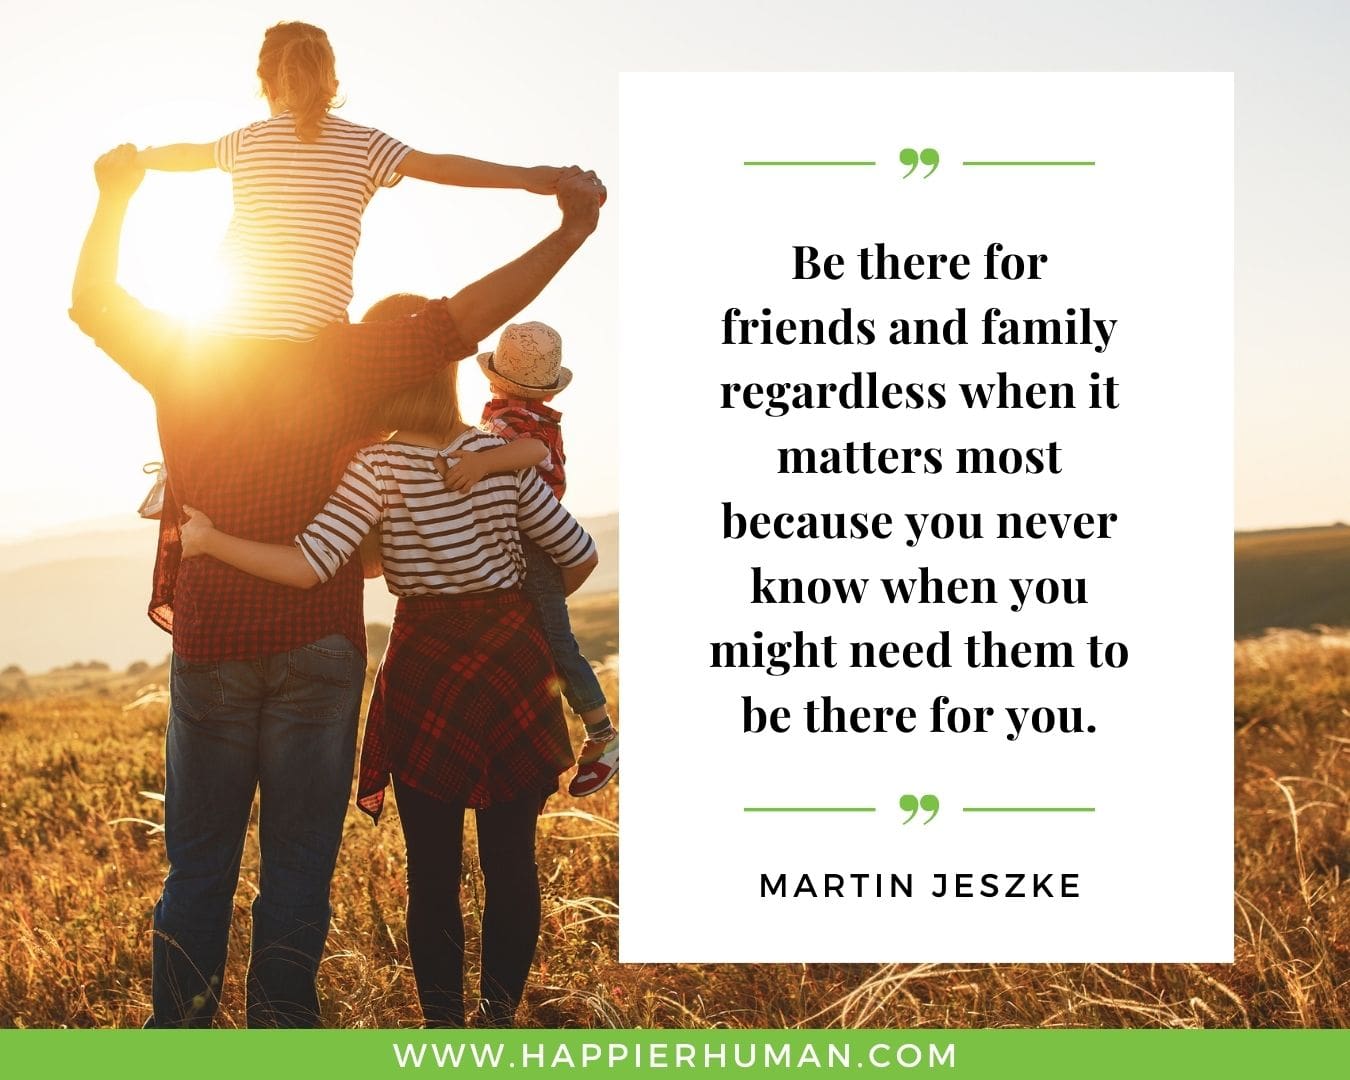 I’m Here for You Quotes - “Be there for friends and family regardless when it matters most because you never know when you might need them to be there for you.” – Martin Jeszke